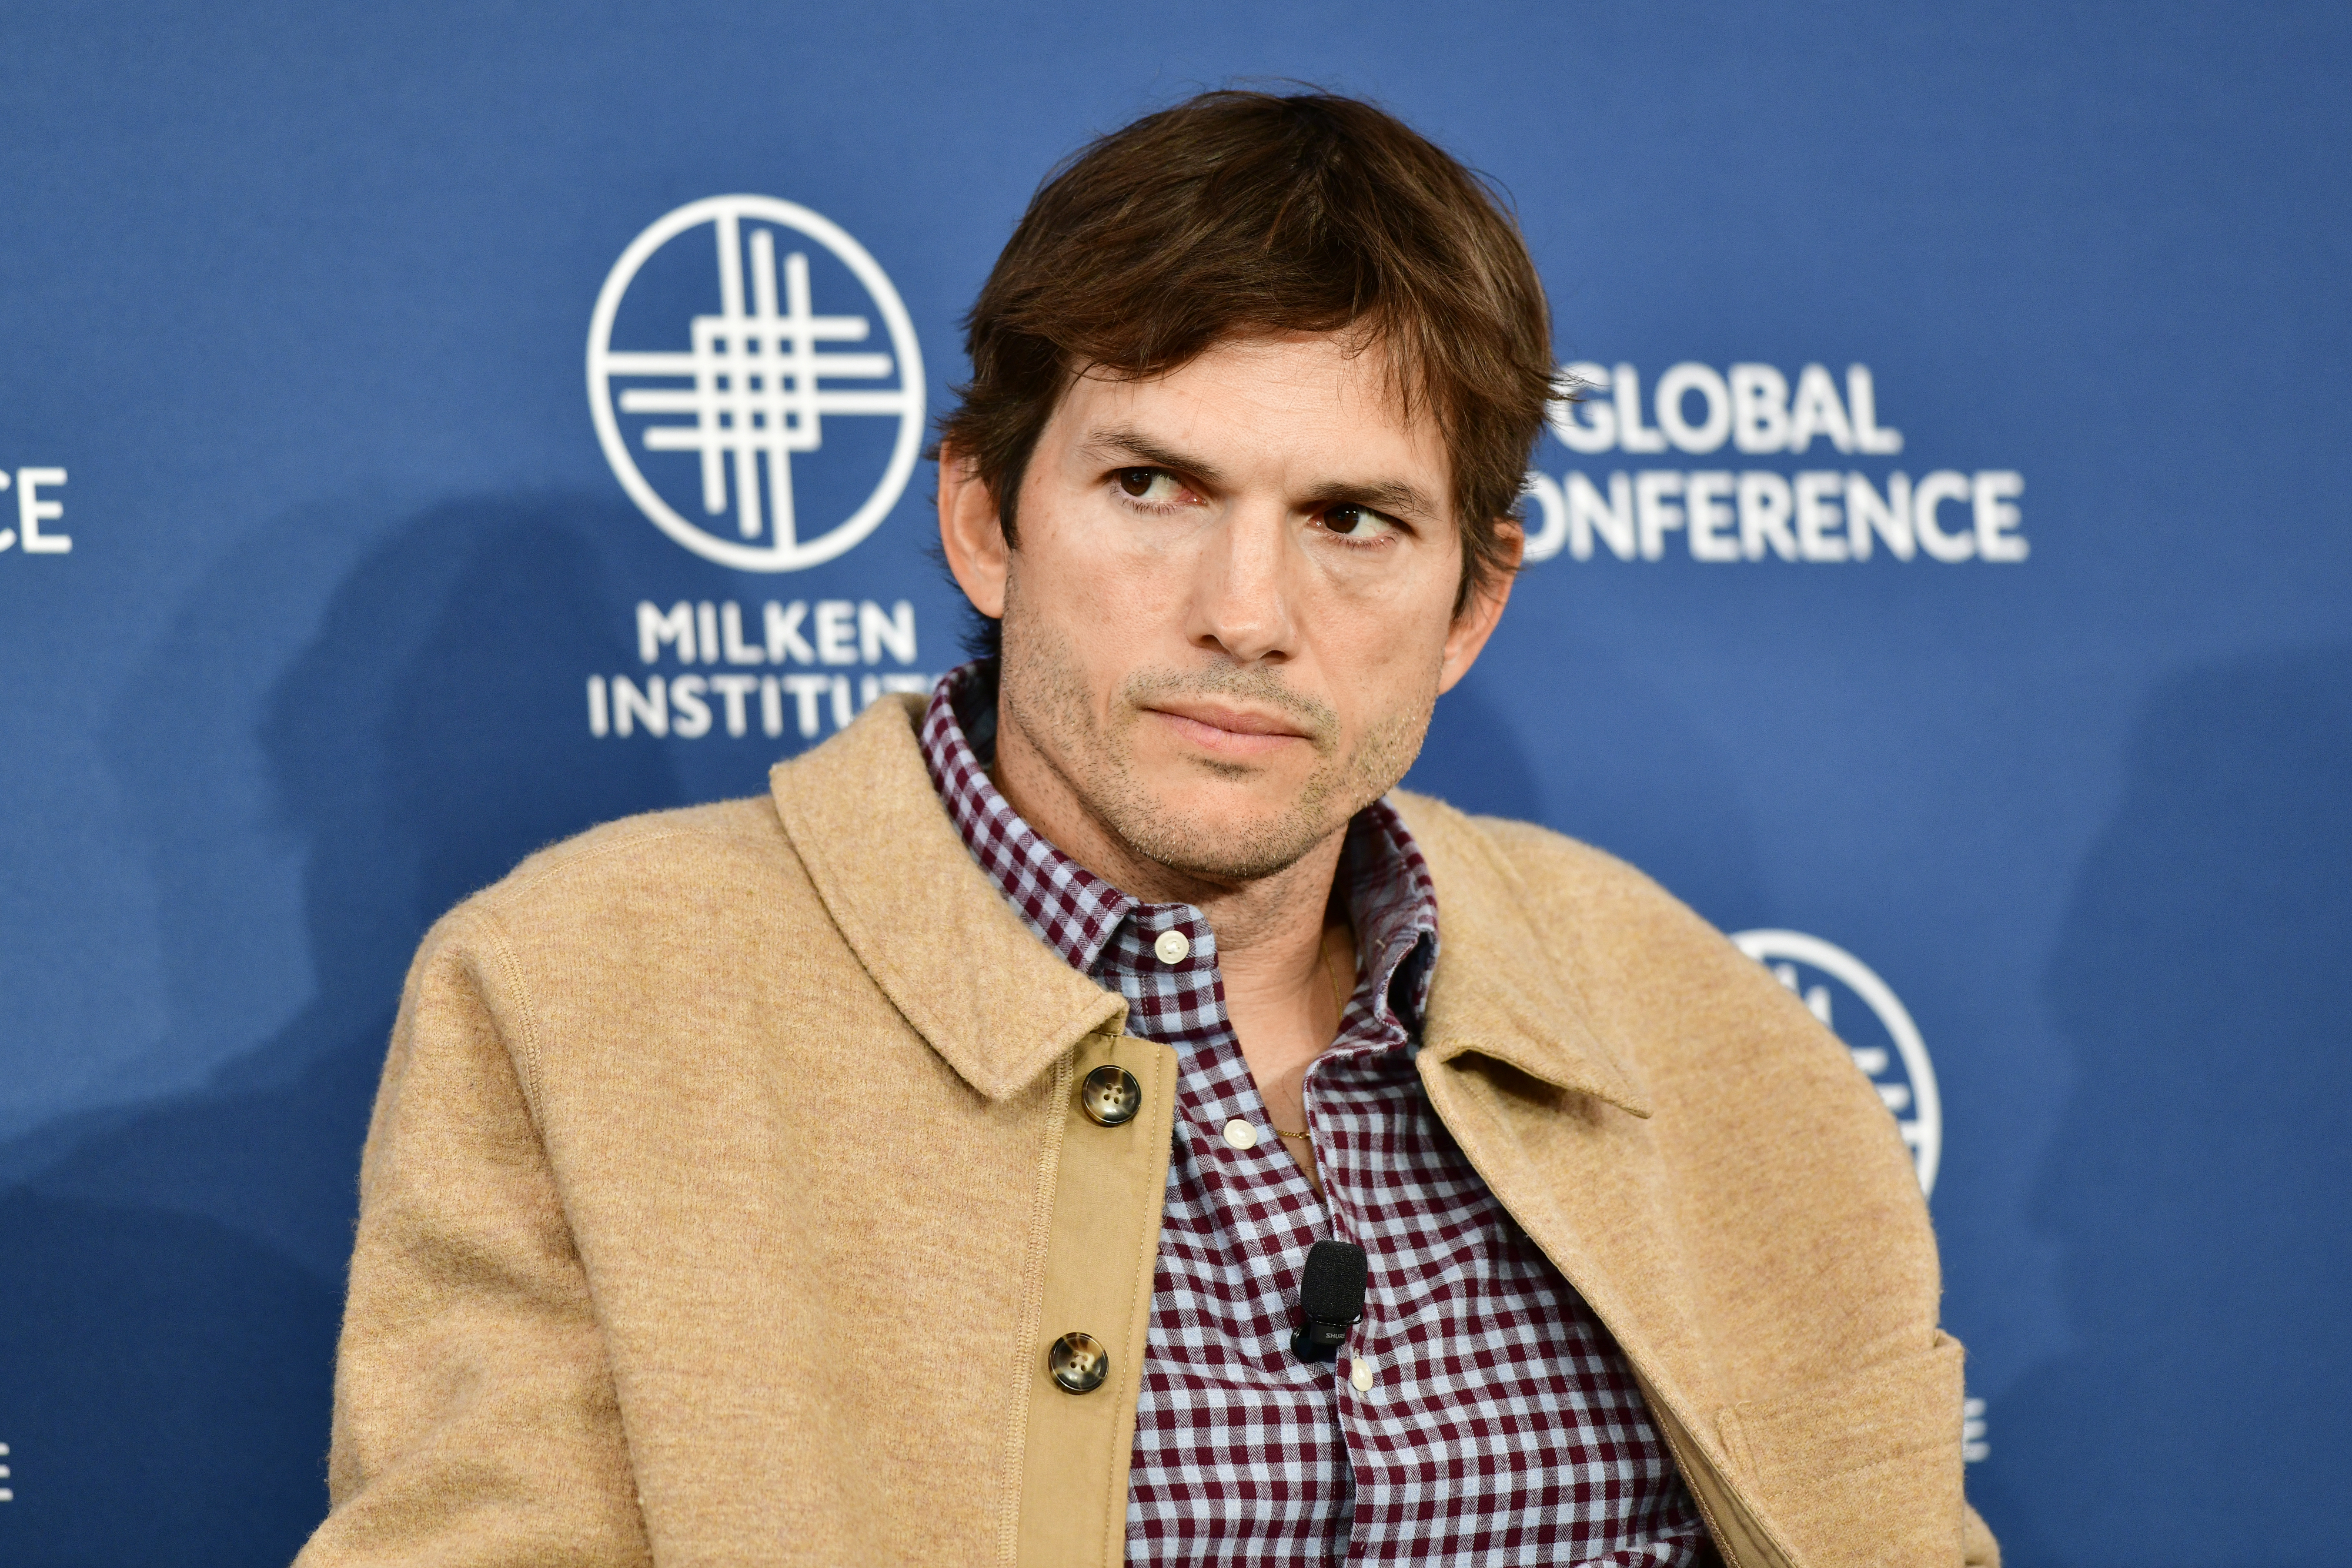 Ashton Kutcher in a jacket and plaid shirt at an event